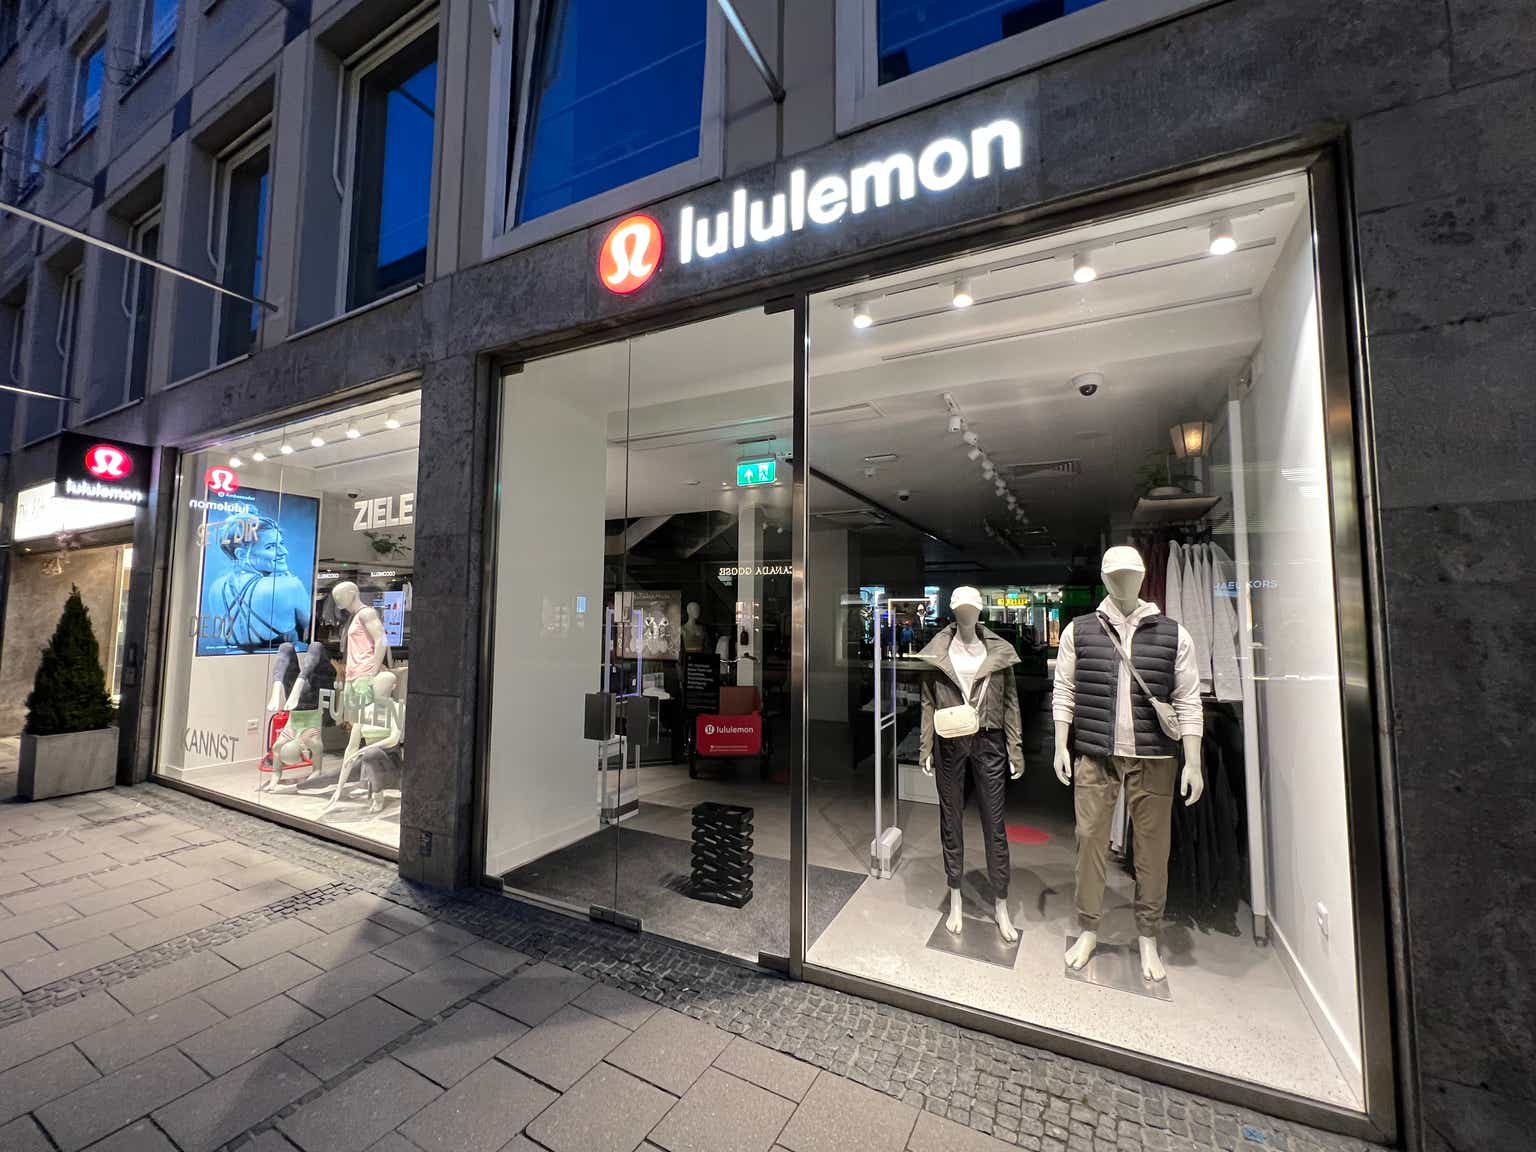 Lululemon Stock: Things Could Turn Sour In The Near Term (NASDAQ